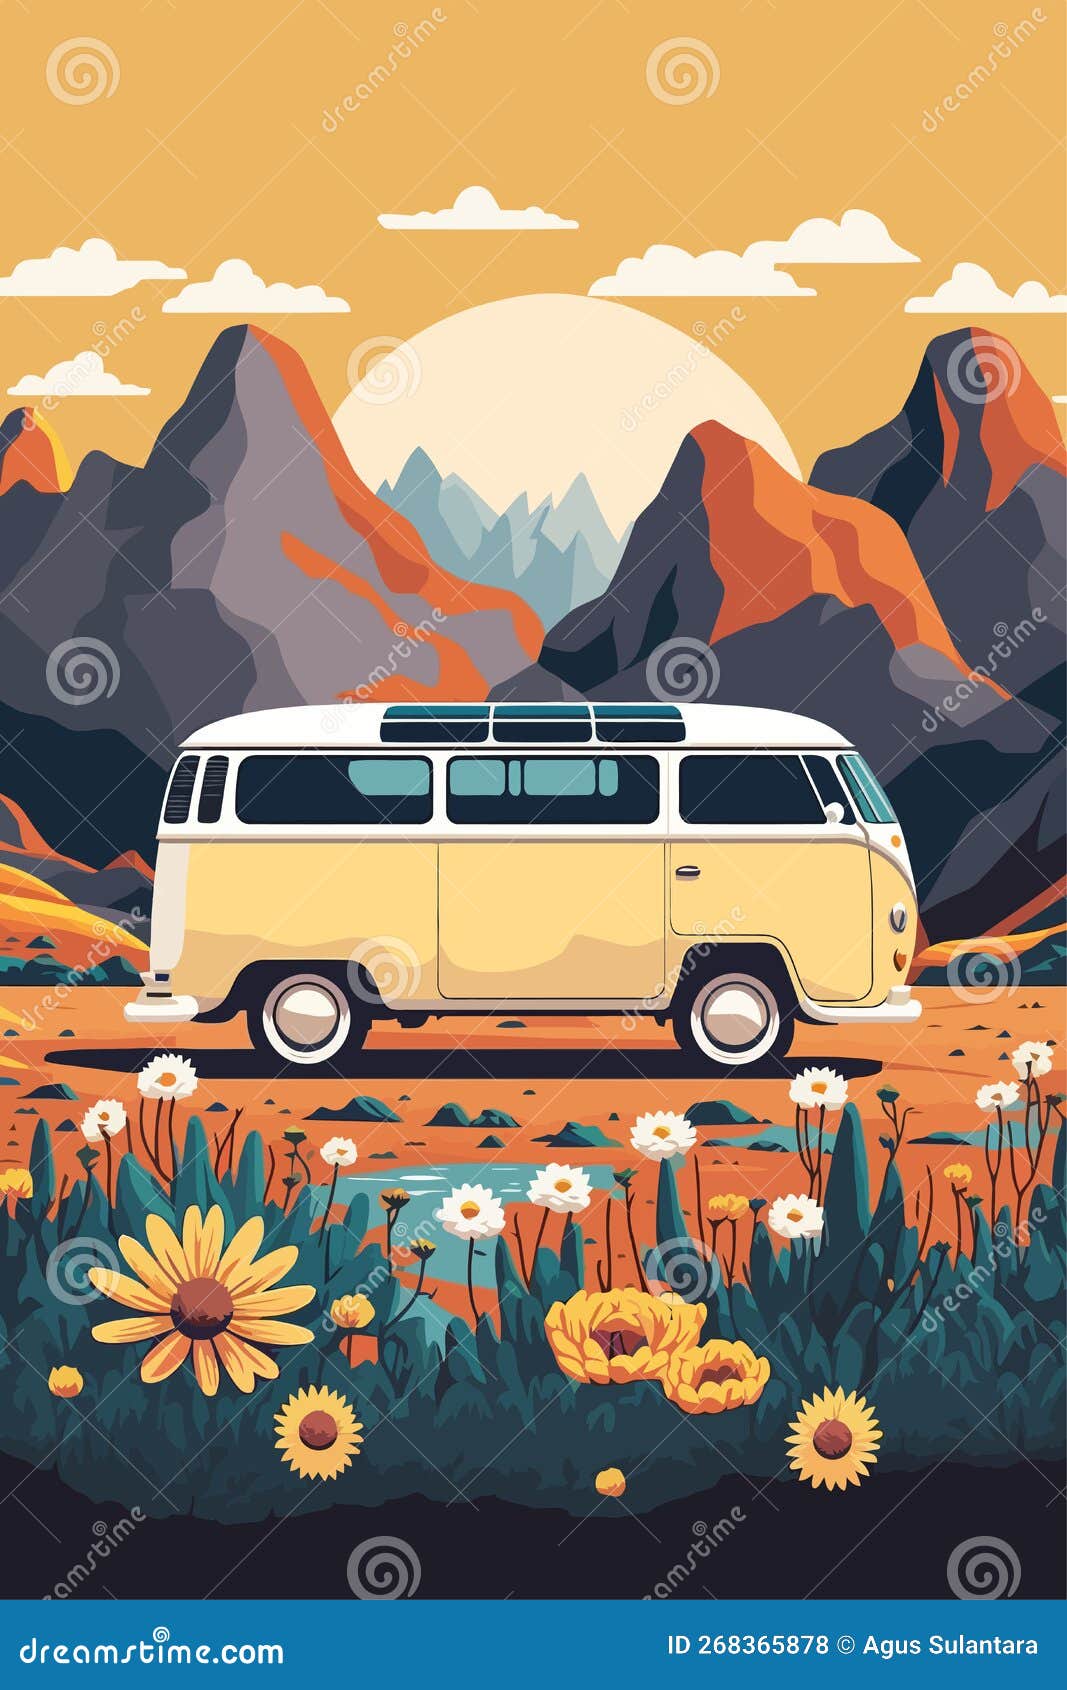 Vintage Camper Van on the Background of the Mountains. Vector ...